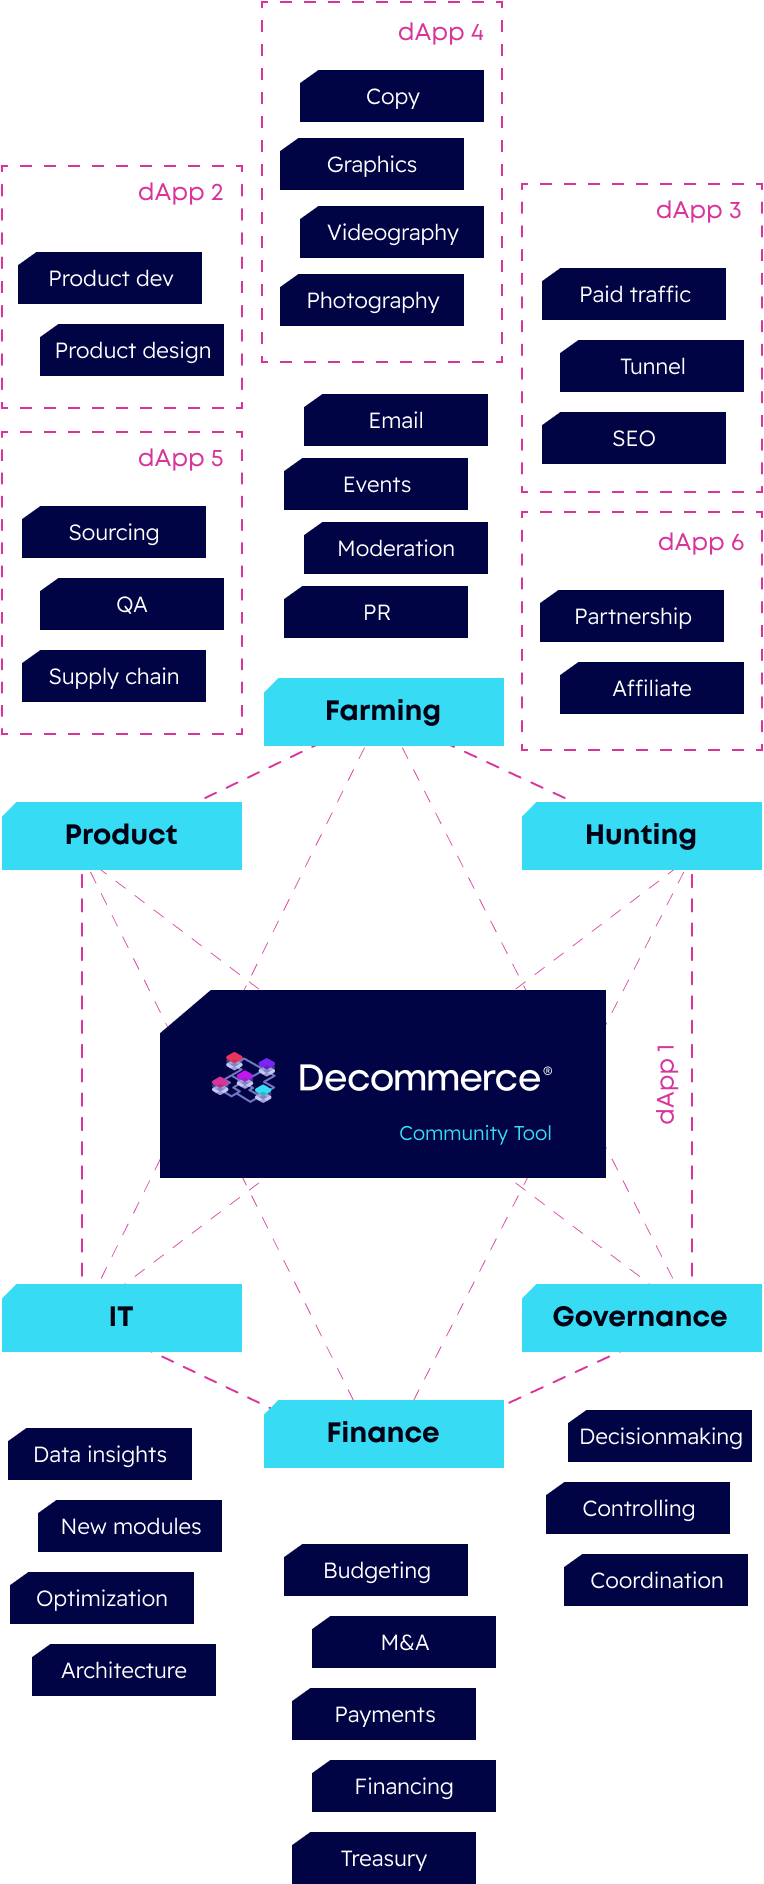 With Decommerce at the center, this image has farming, product, hunting, governance, IT and finance as a part of the larger ecosystem